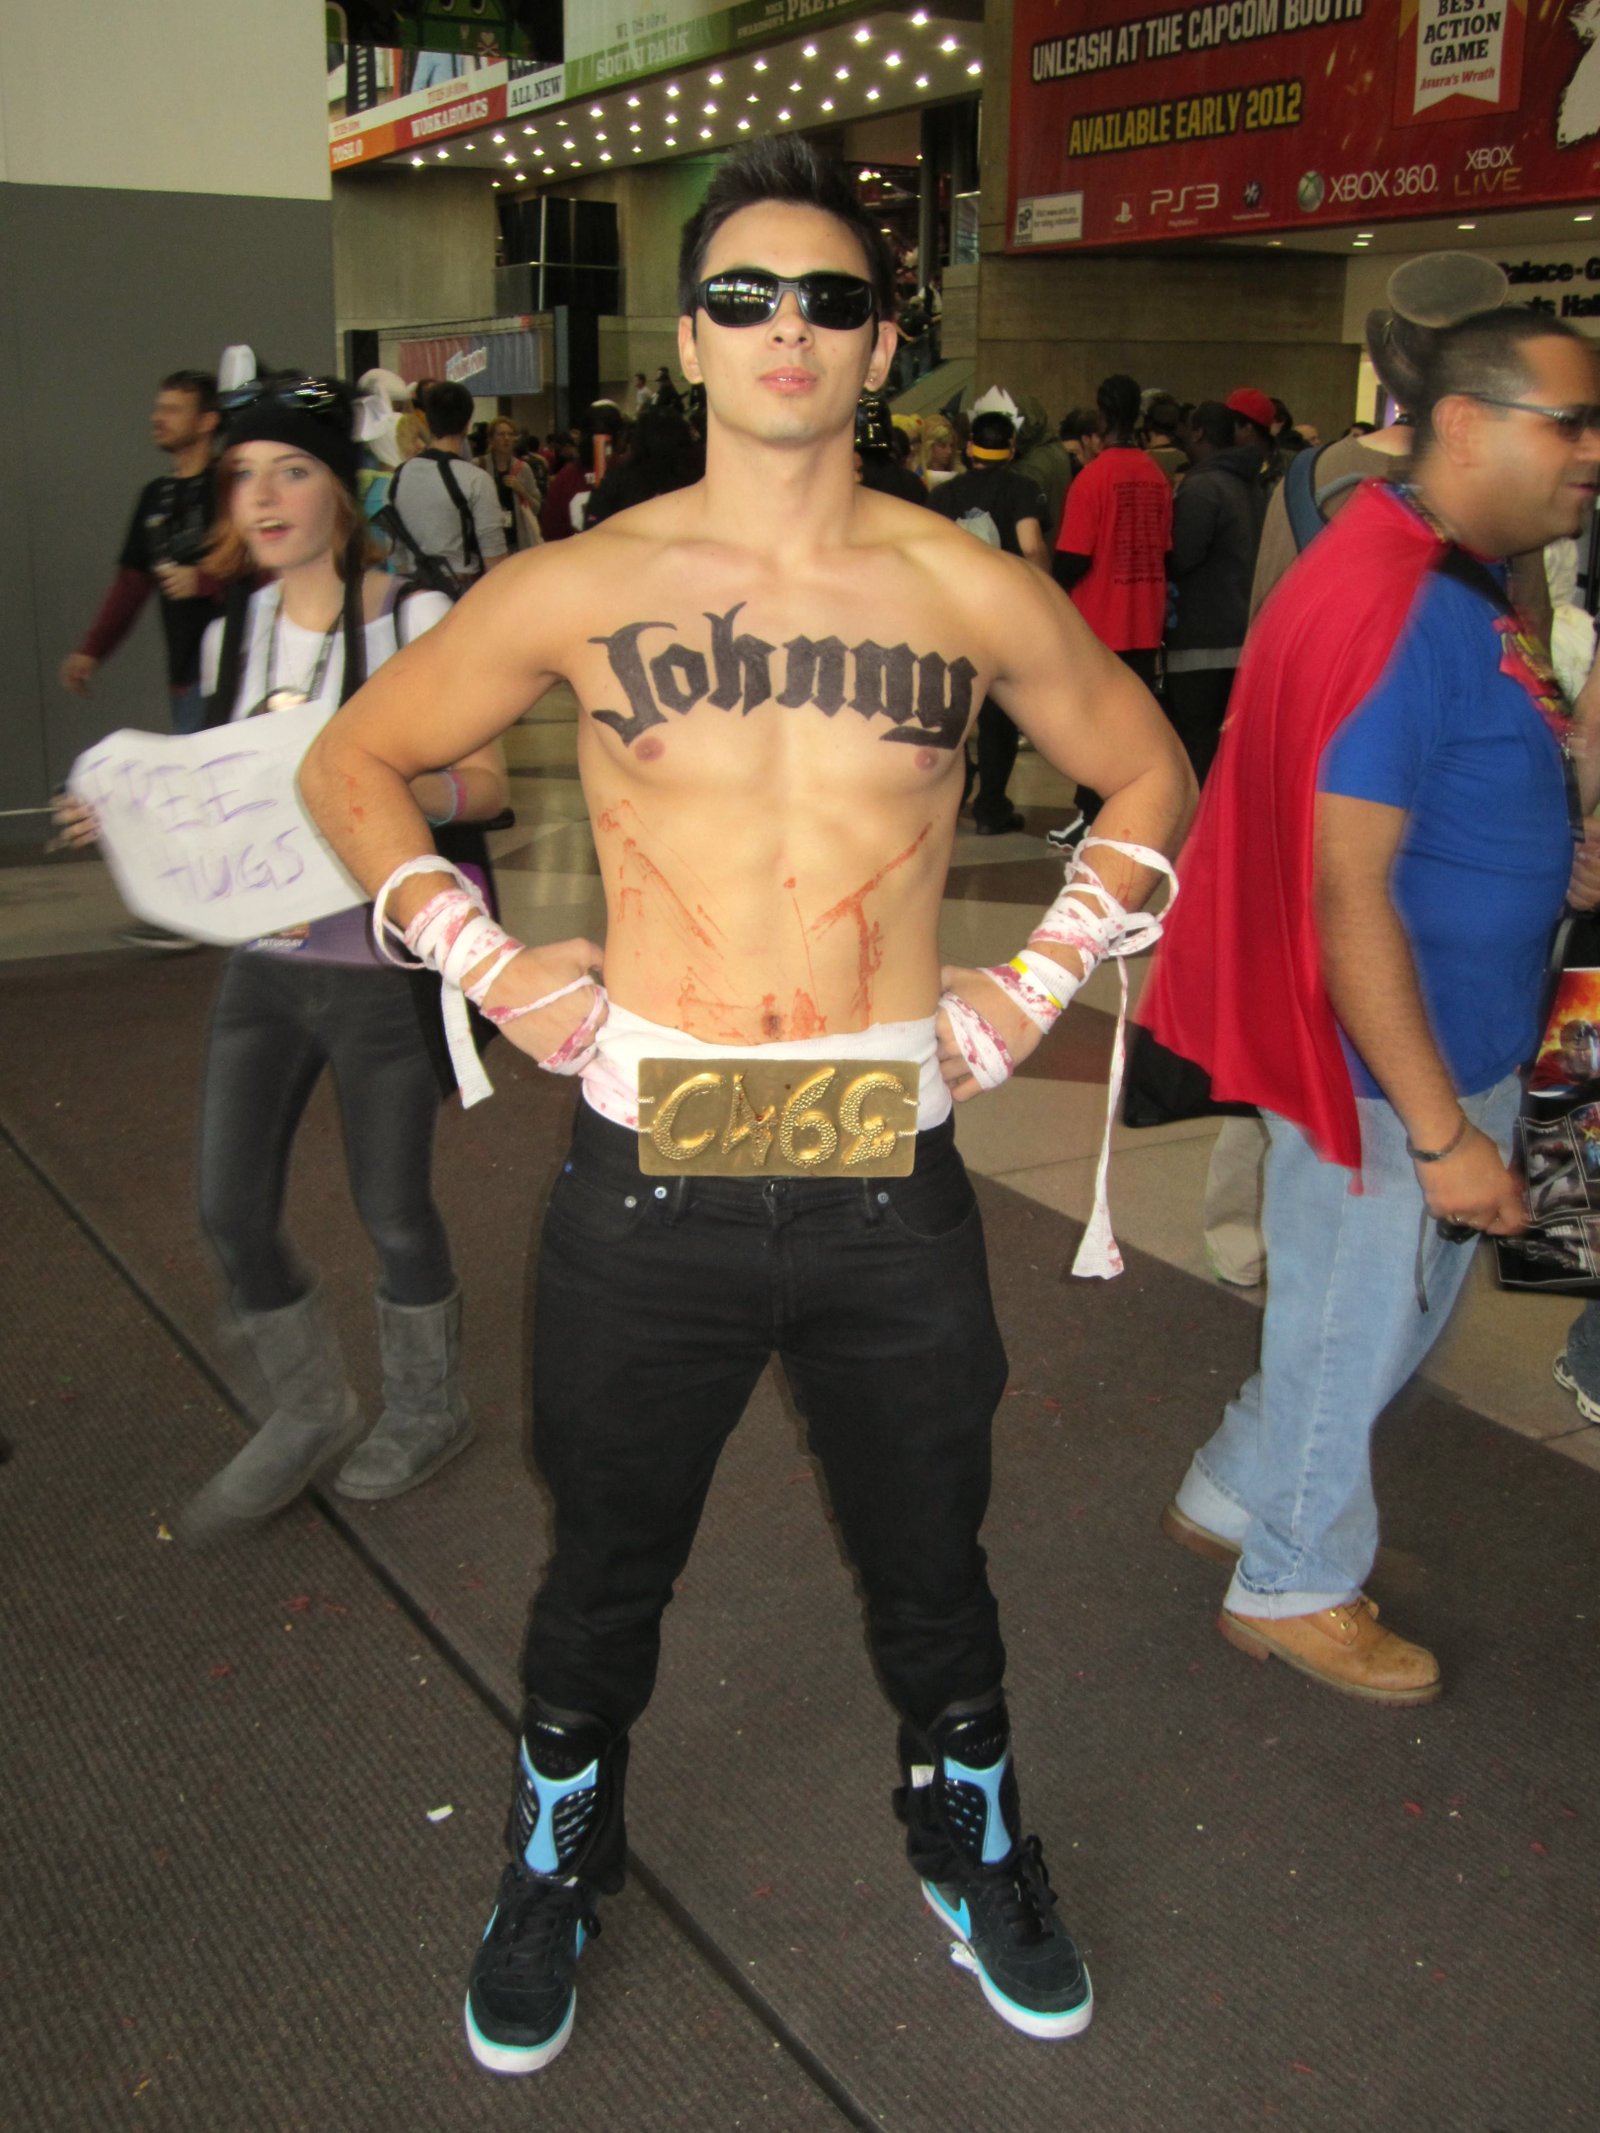 NYCC 2011: Cosplay Photos: Johnny Cage3240 x 4320